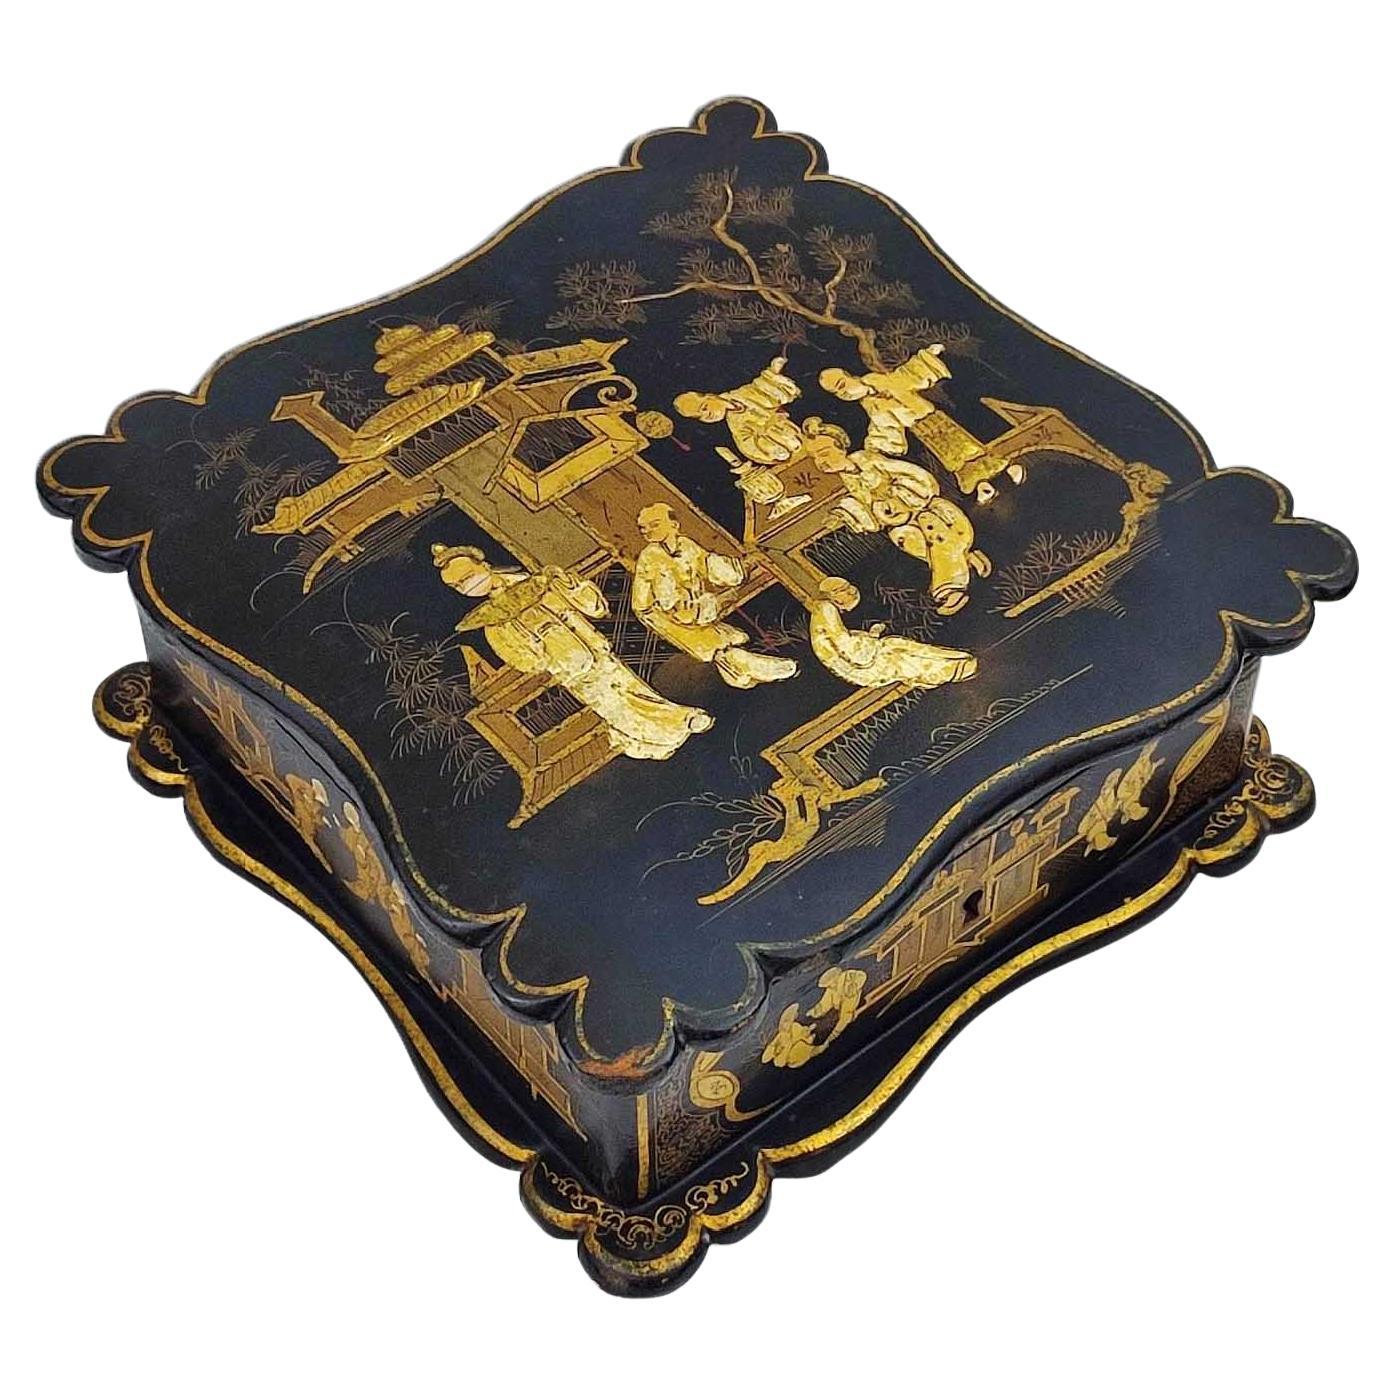 French Napoleon III Jewelry Box in Black Lacquer with Asian Decor, 19th Century 